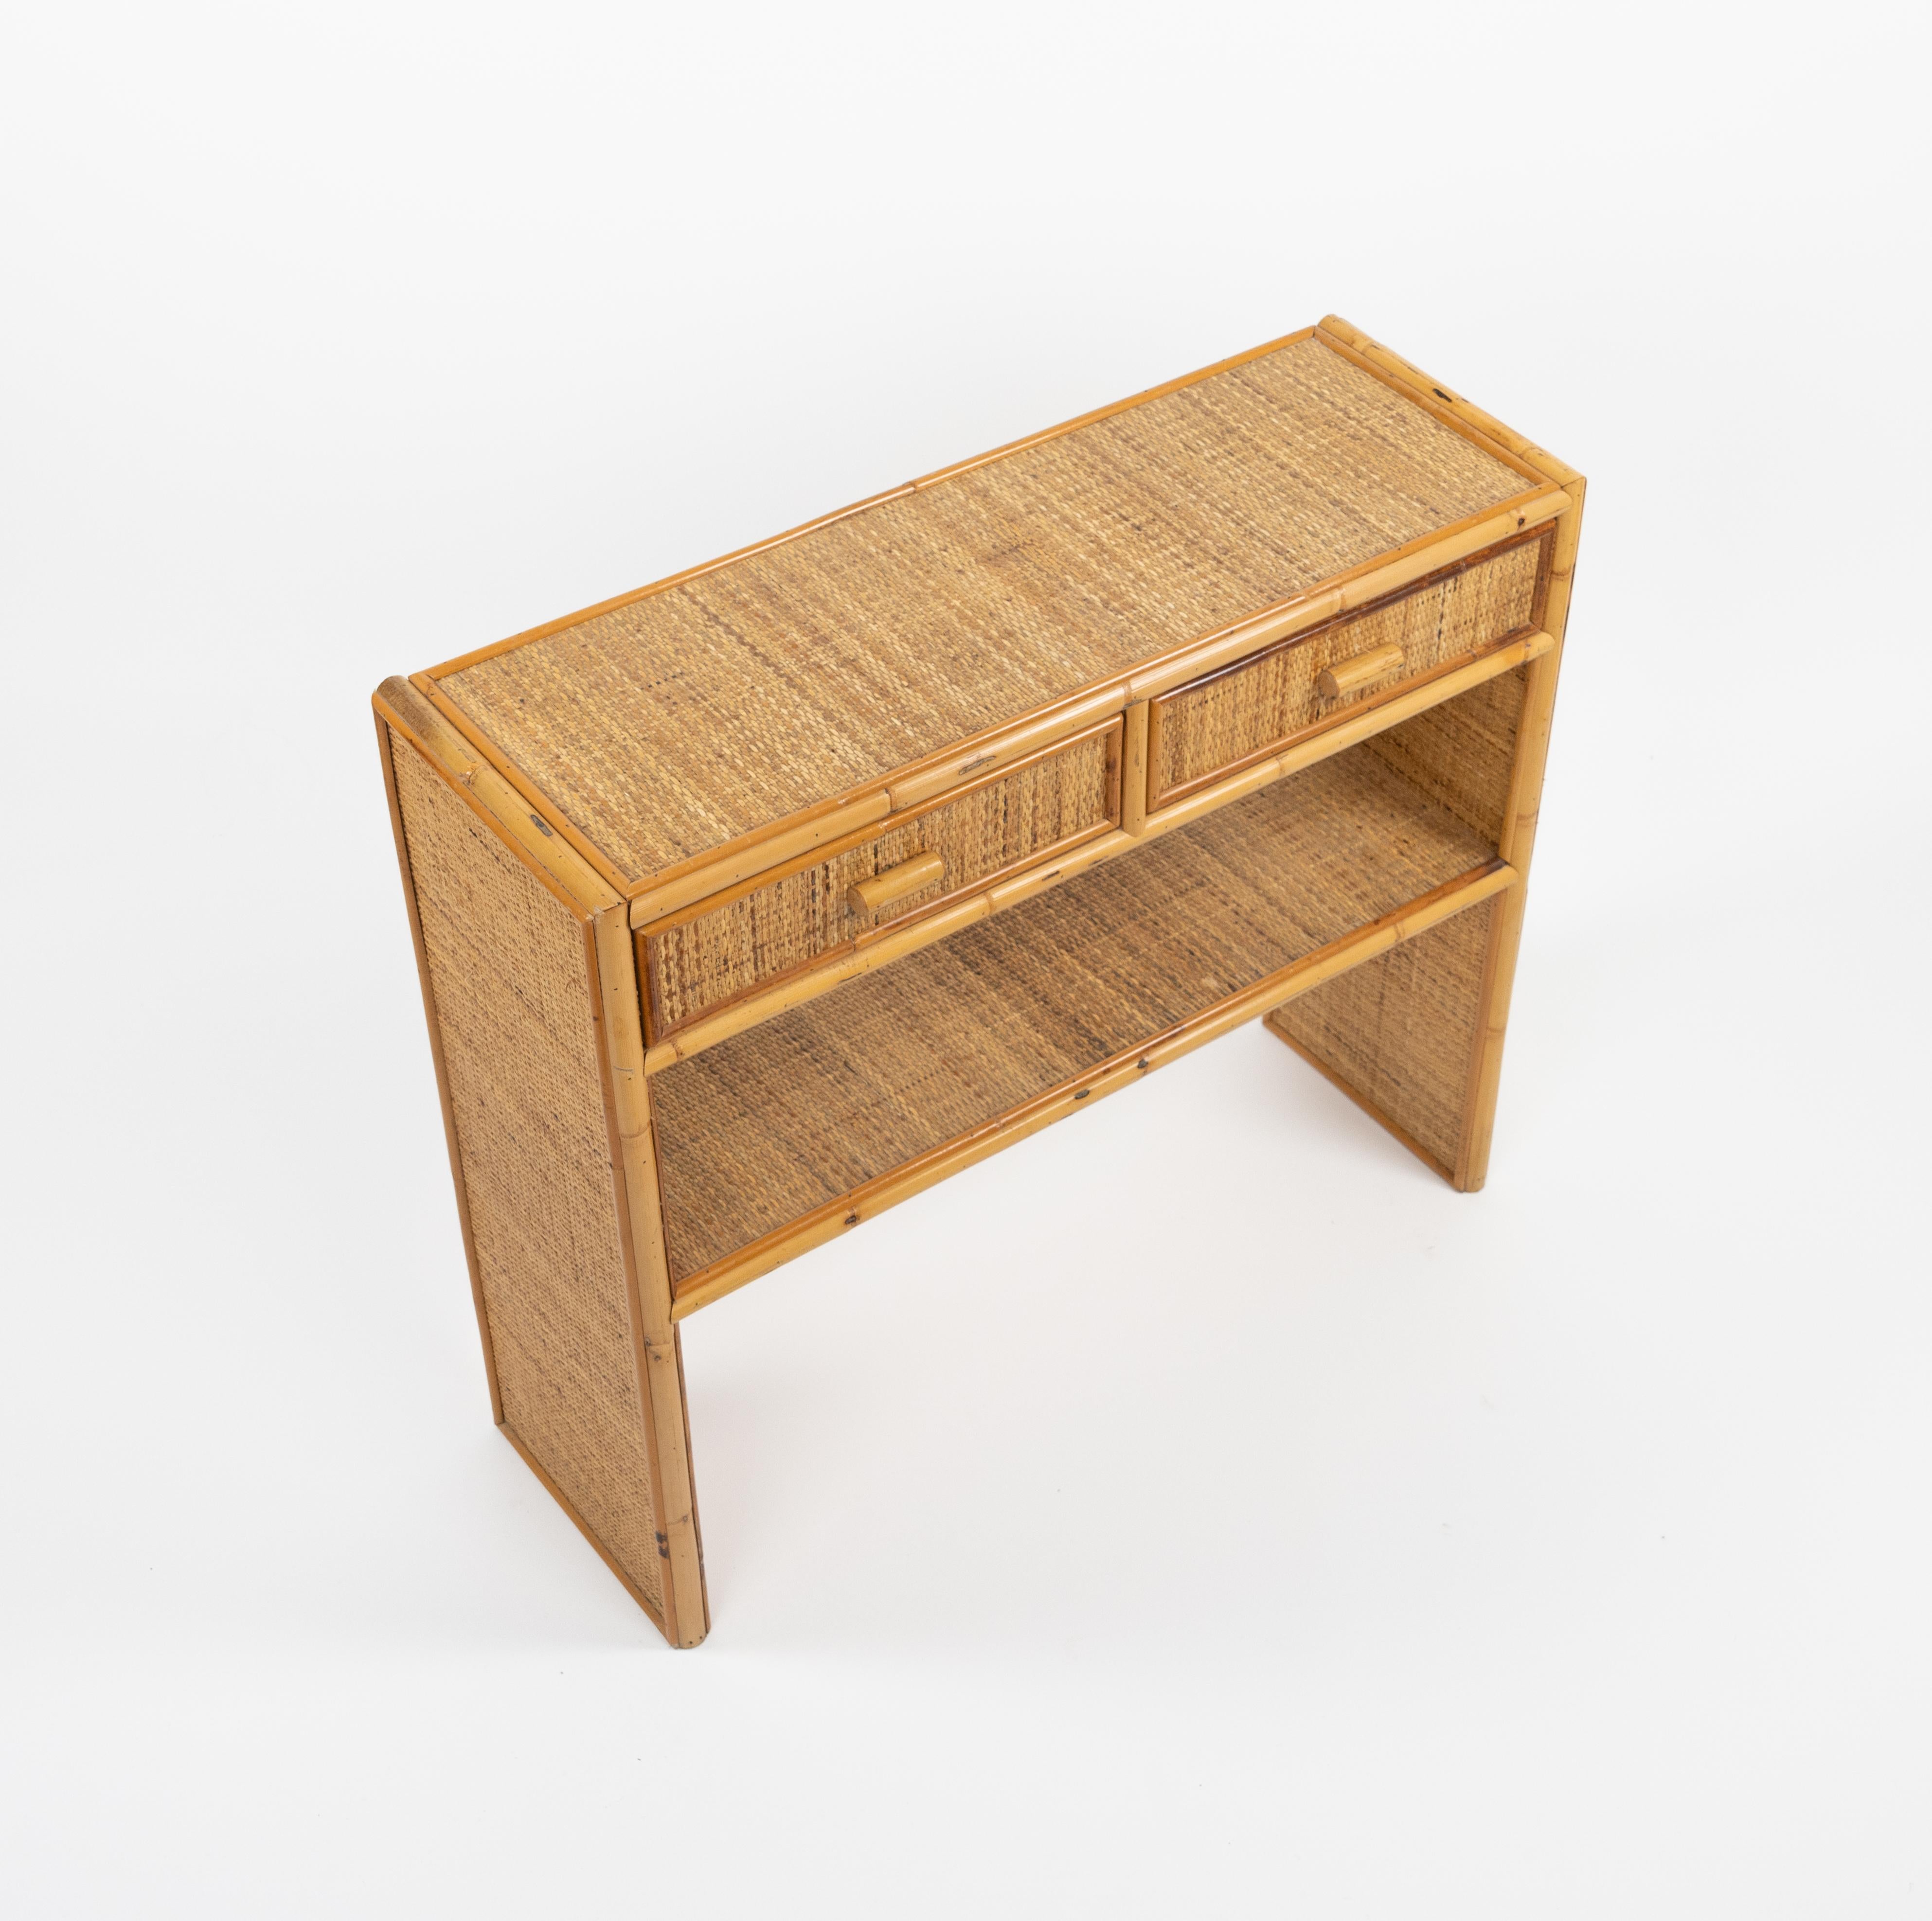 Italian Midcentury Bamboo and Rattan Console Table with Drawers, Italy 1970s For Sale